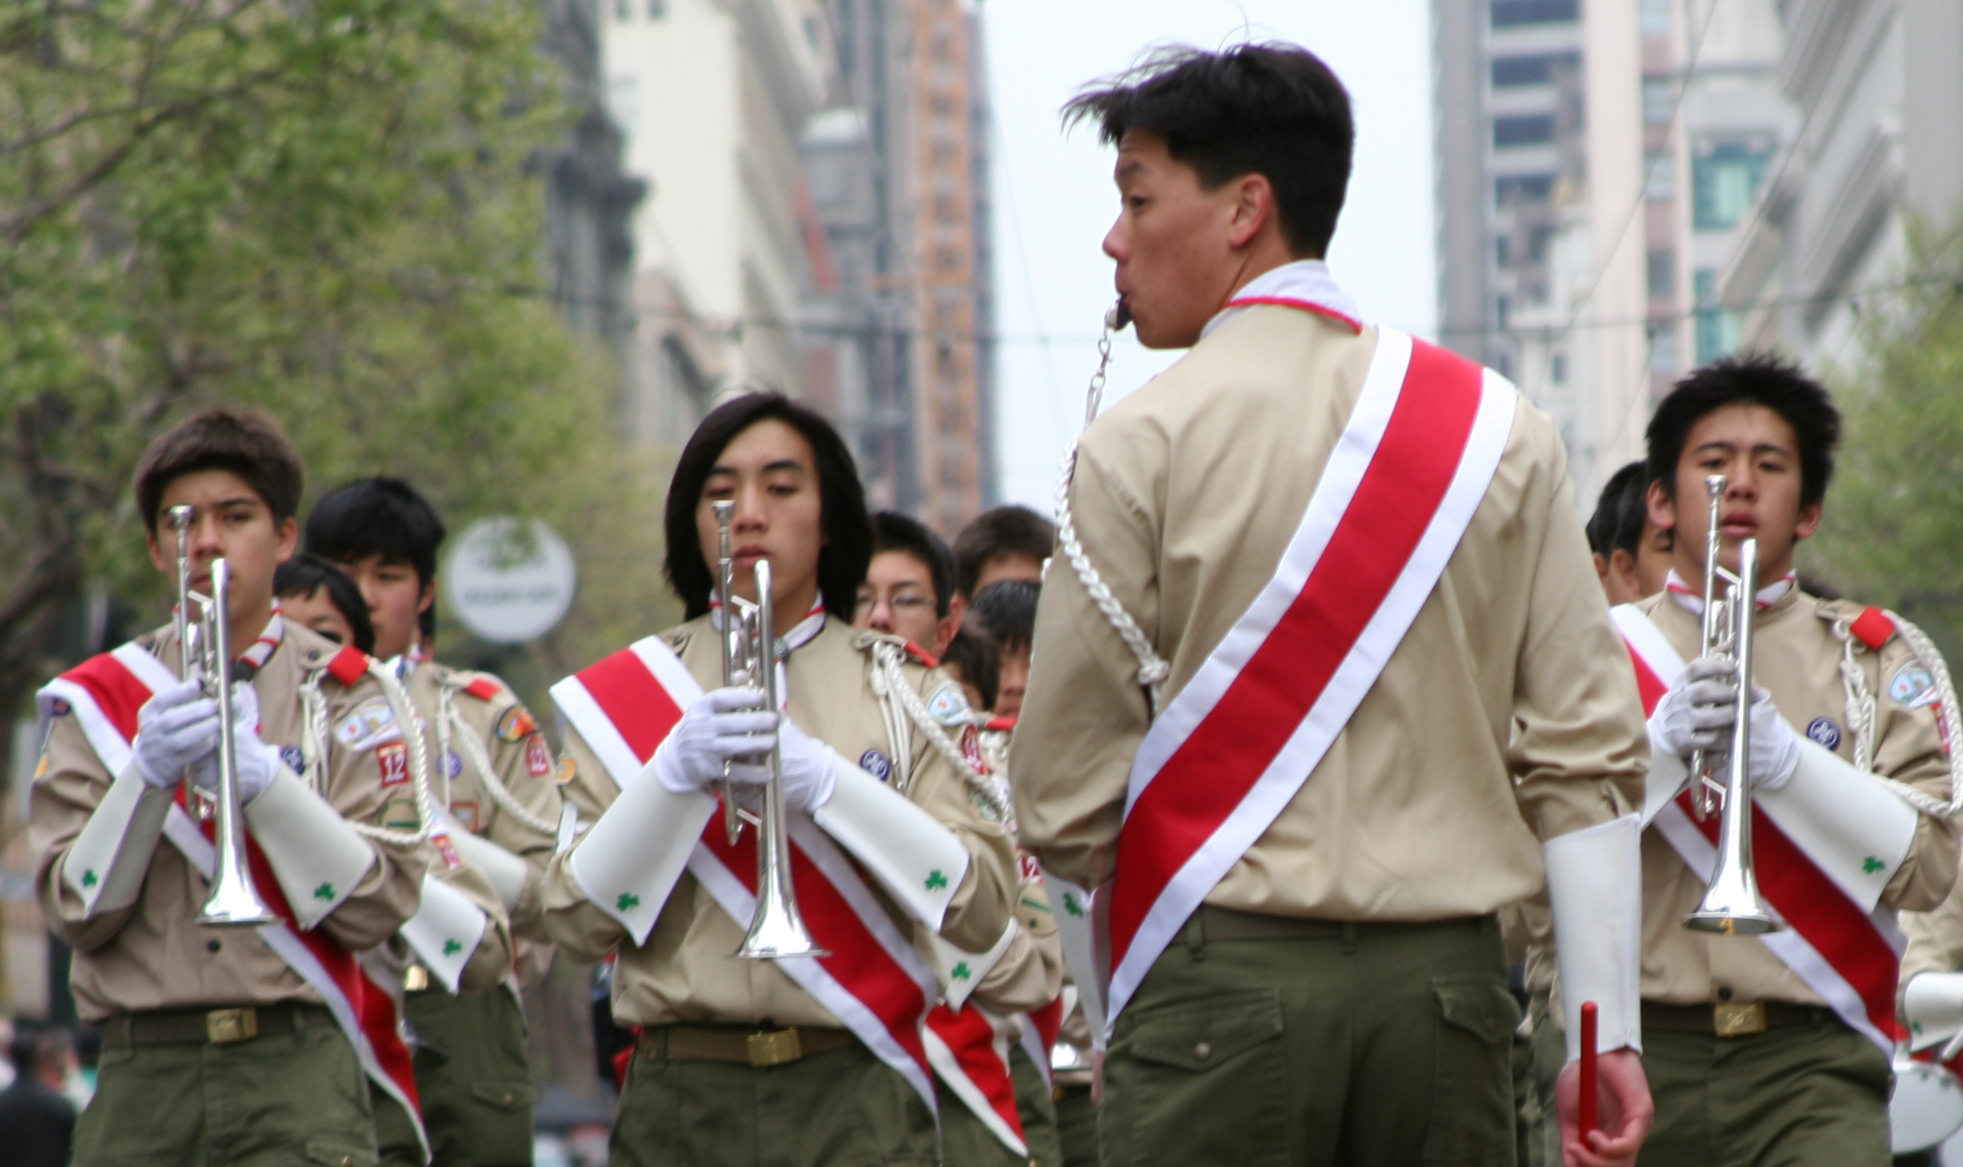 The_Boy_Scouts_Marching_Band.jpg